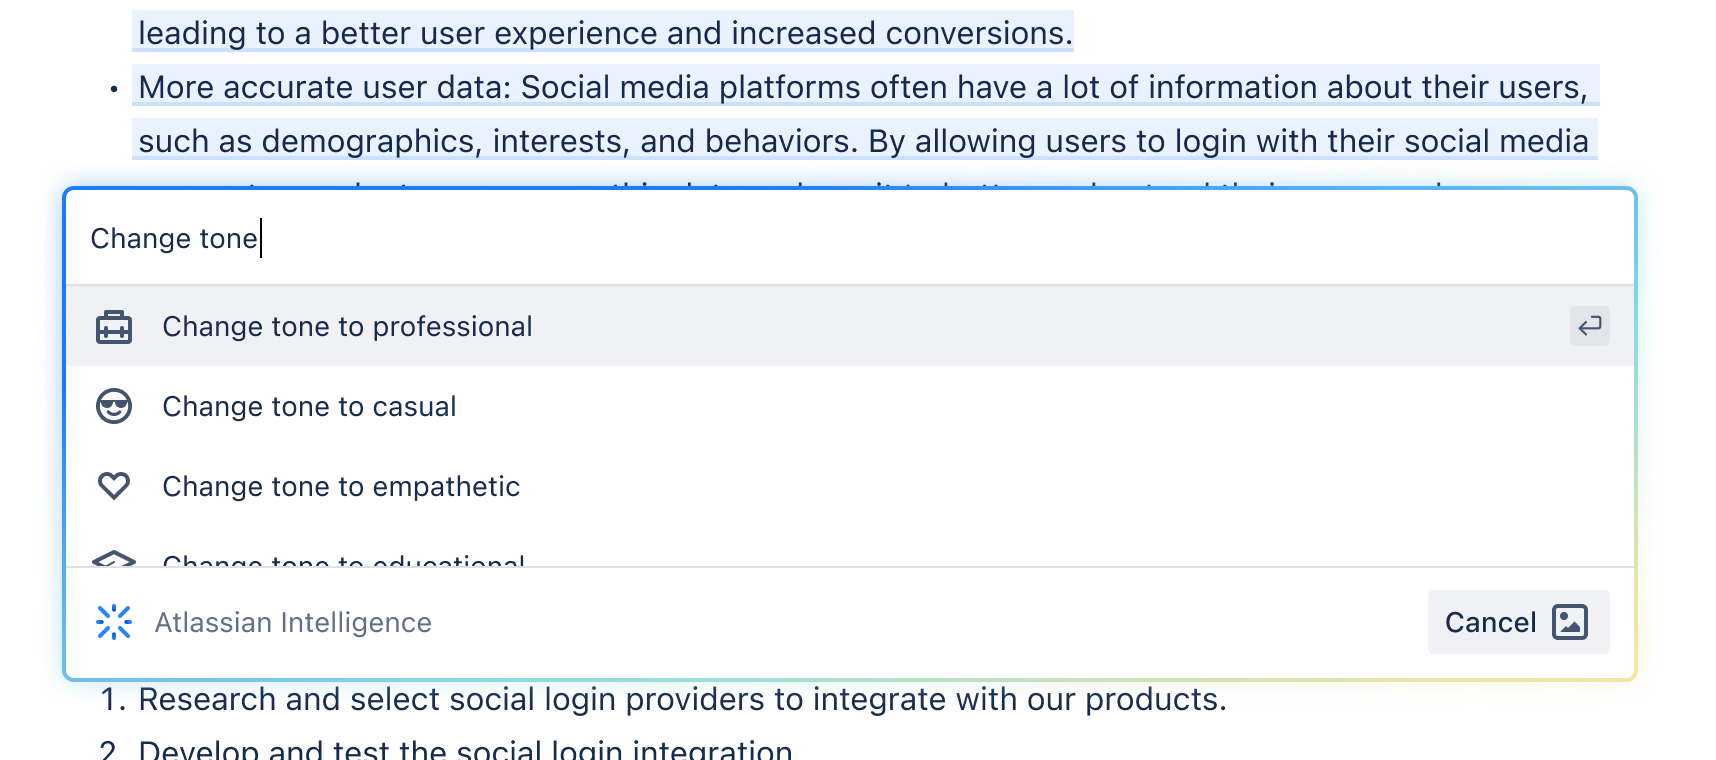 An example of interacting with Atlassian Intelligence when editing content